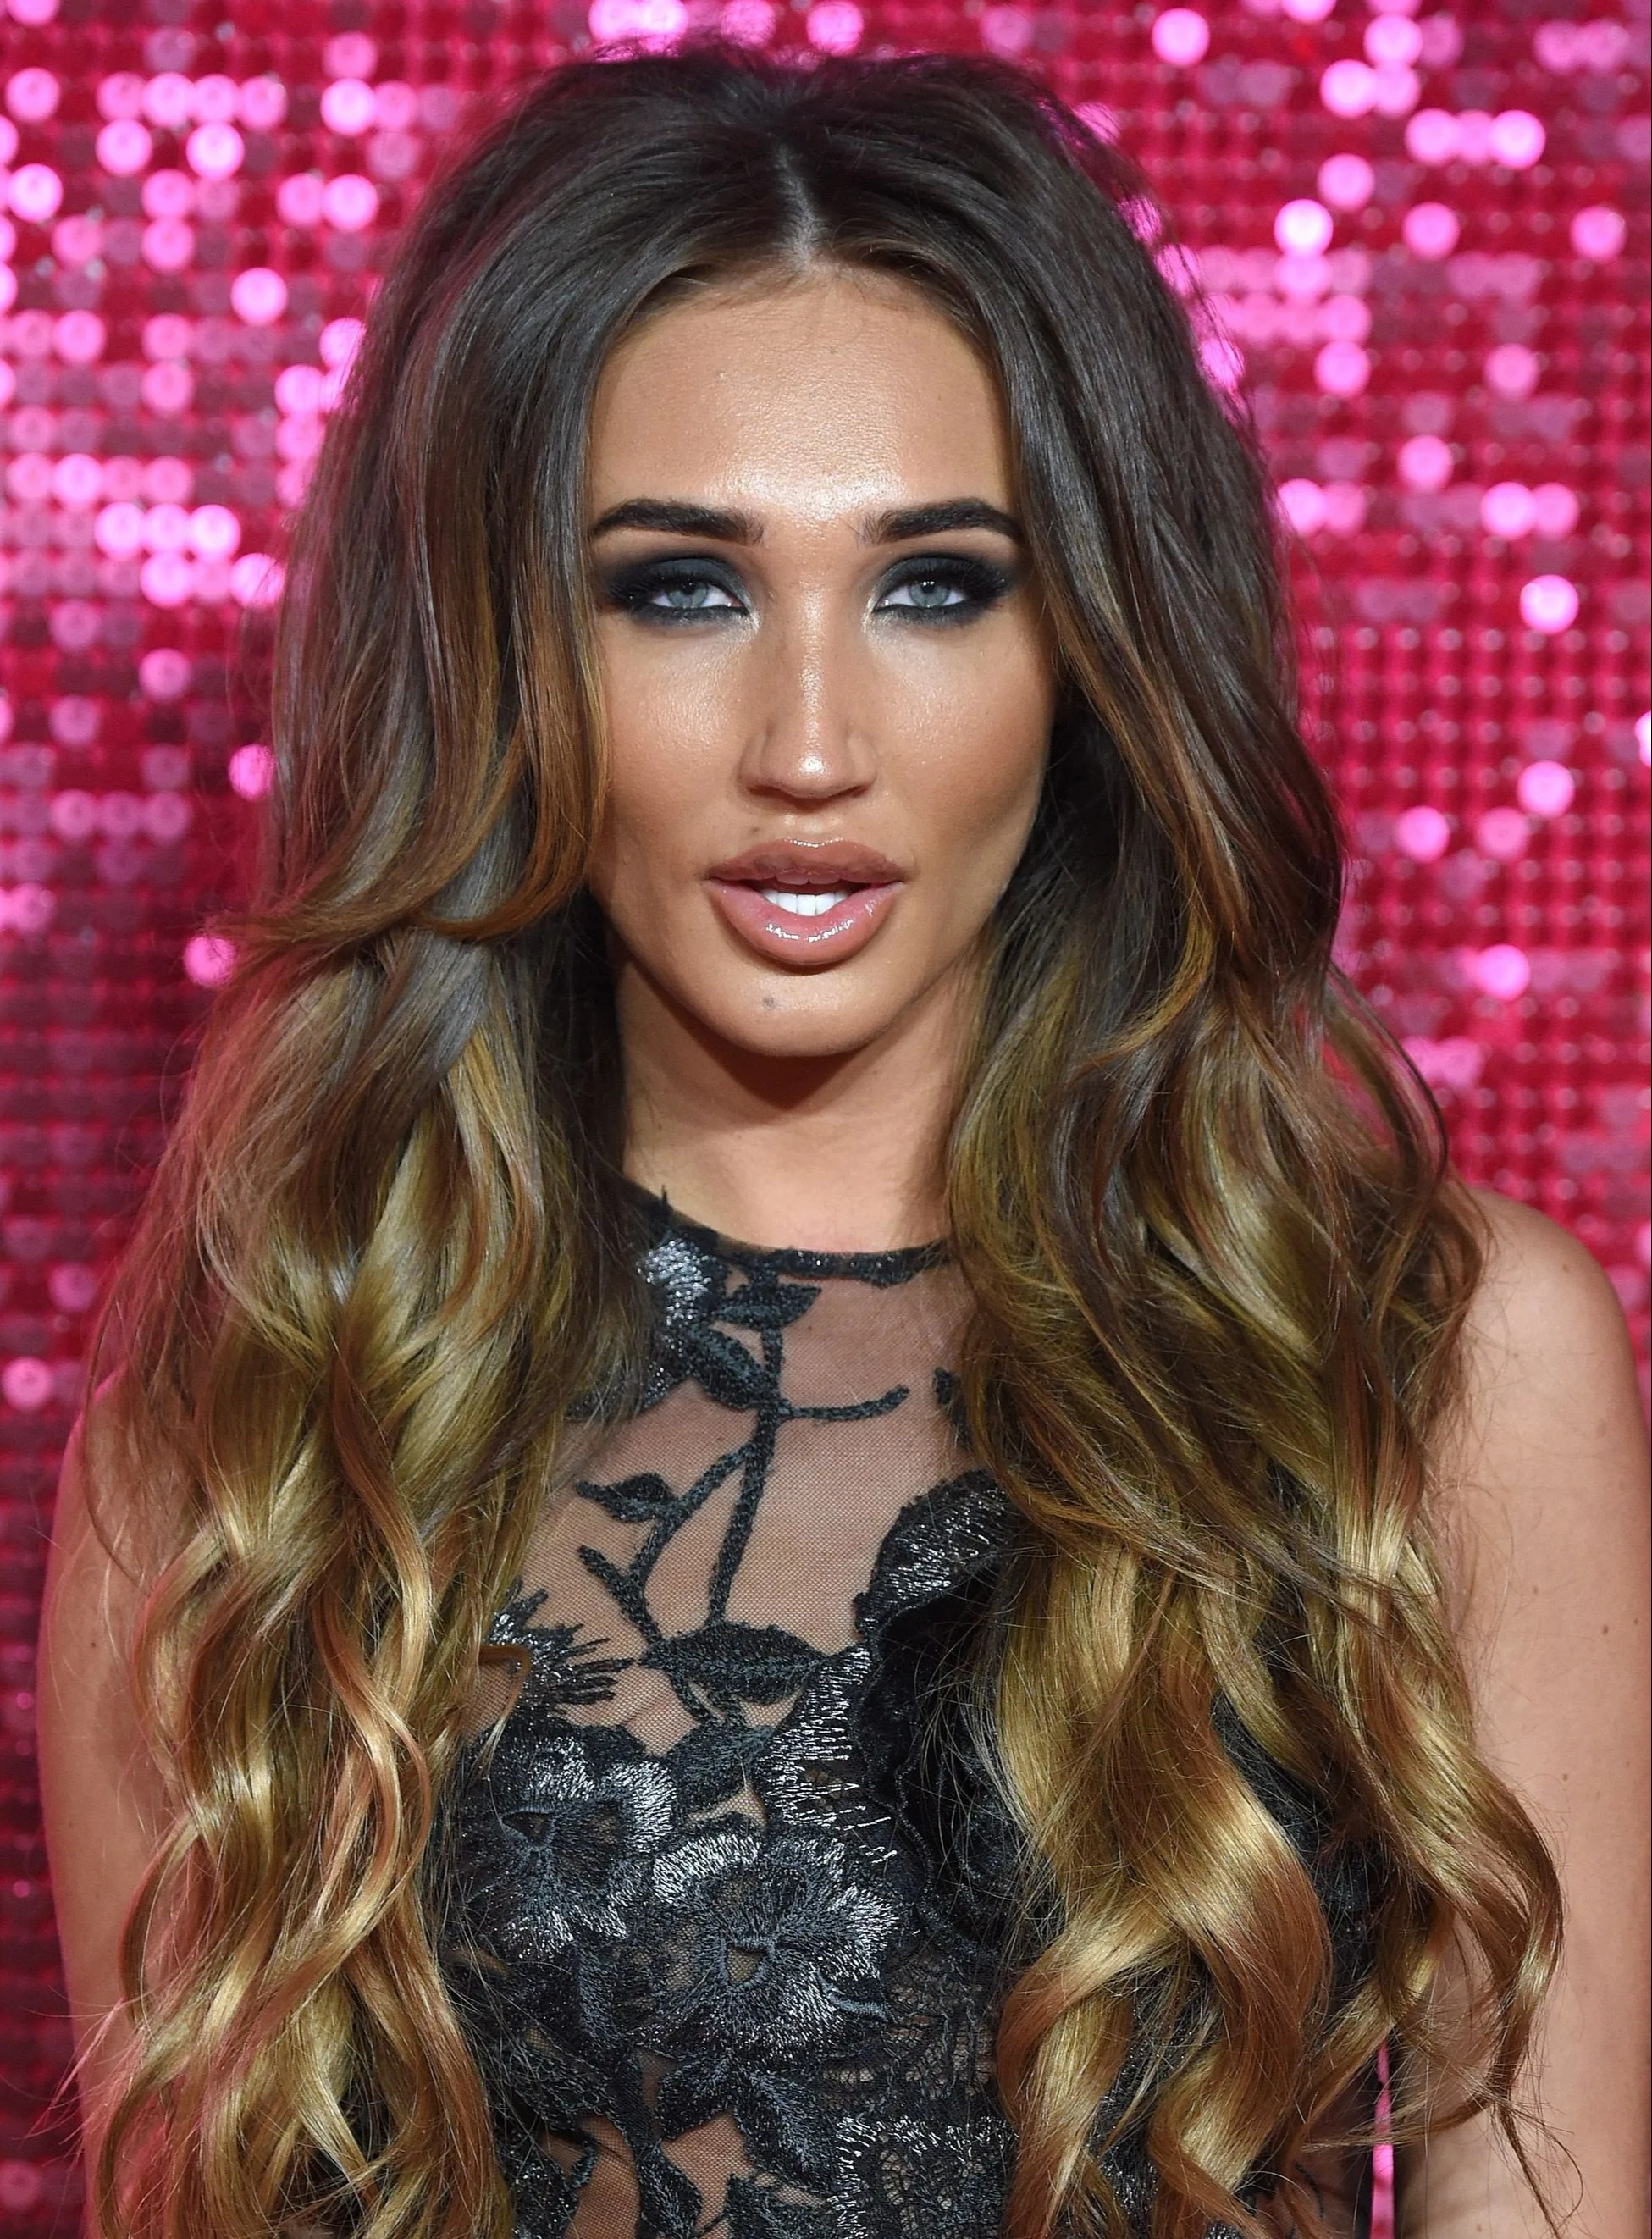 Megan McKenna was known for her love of lip fillers in the early days of her career